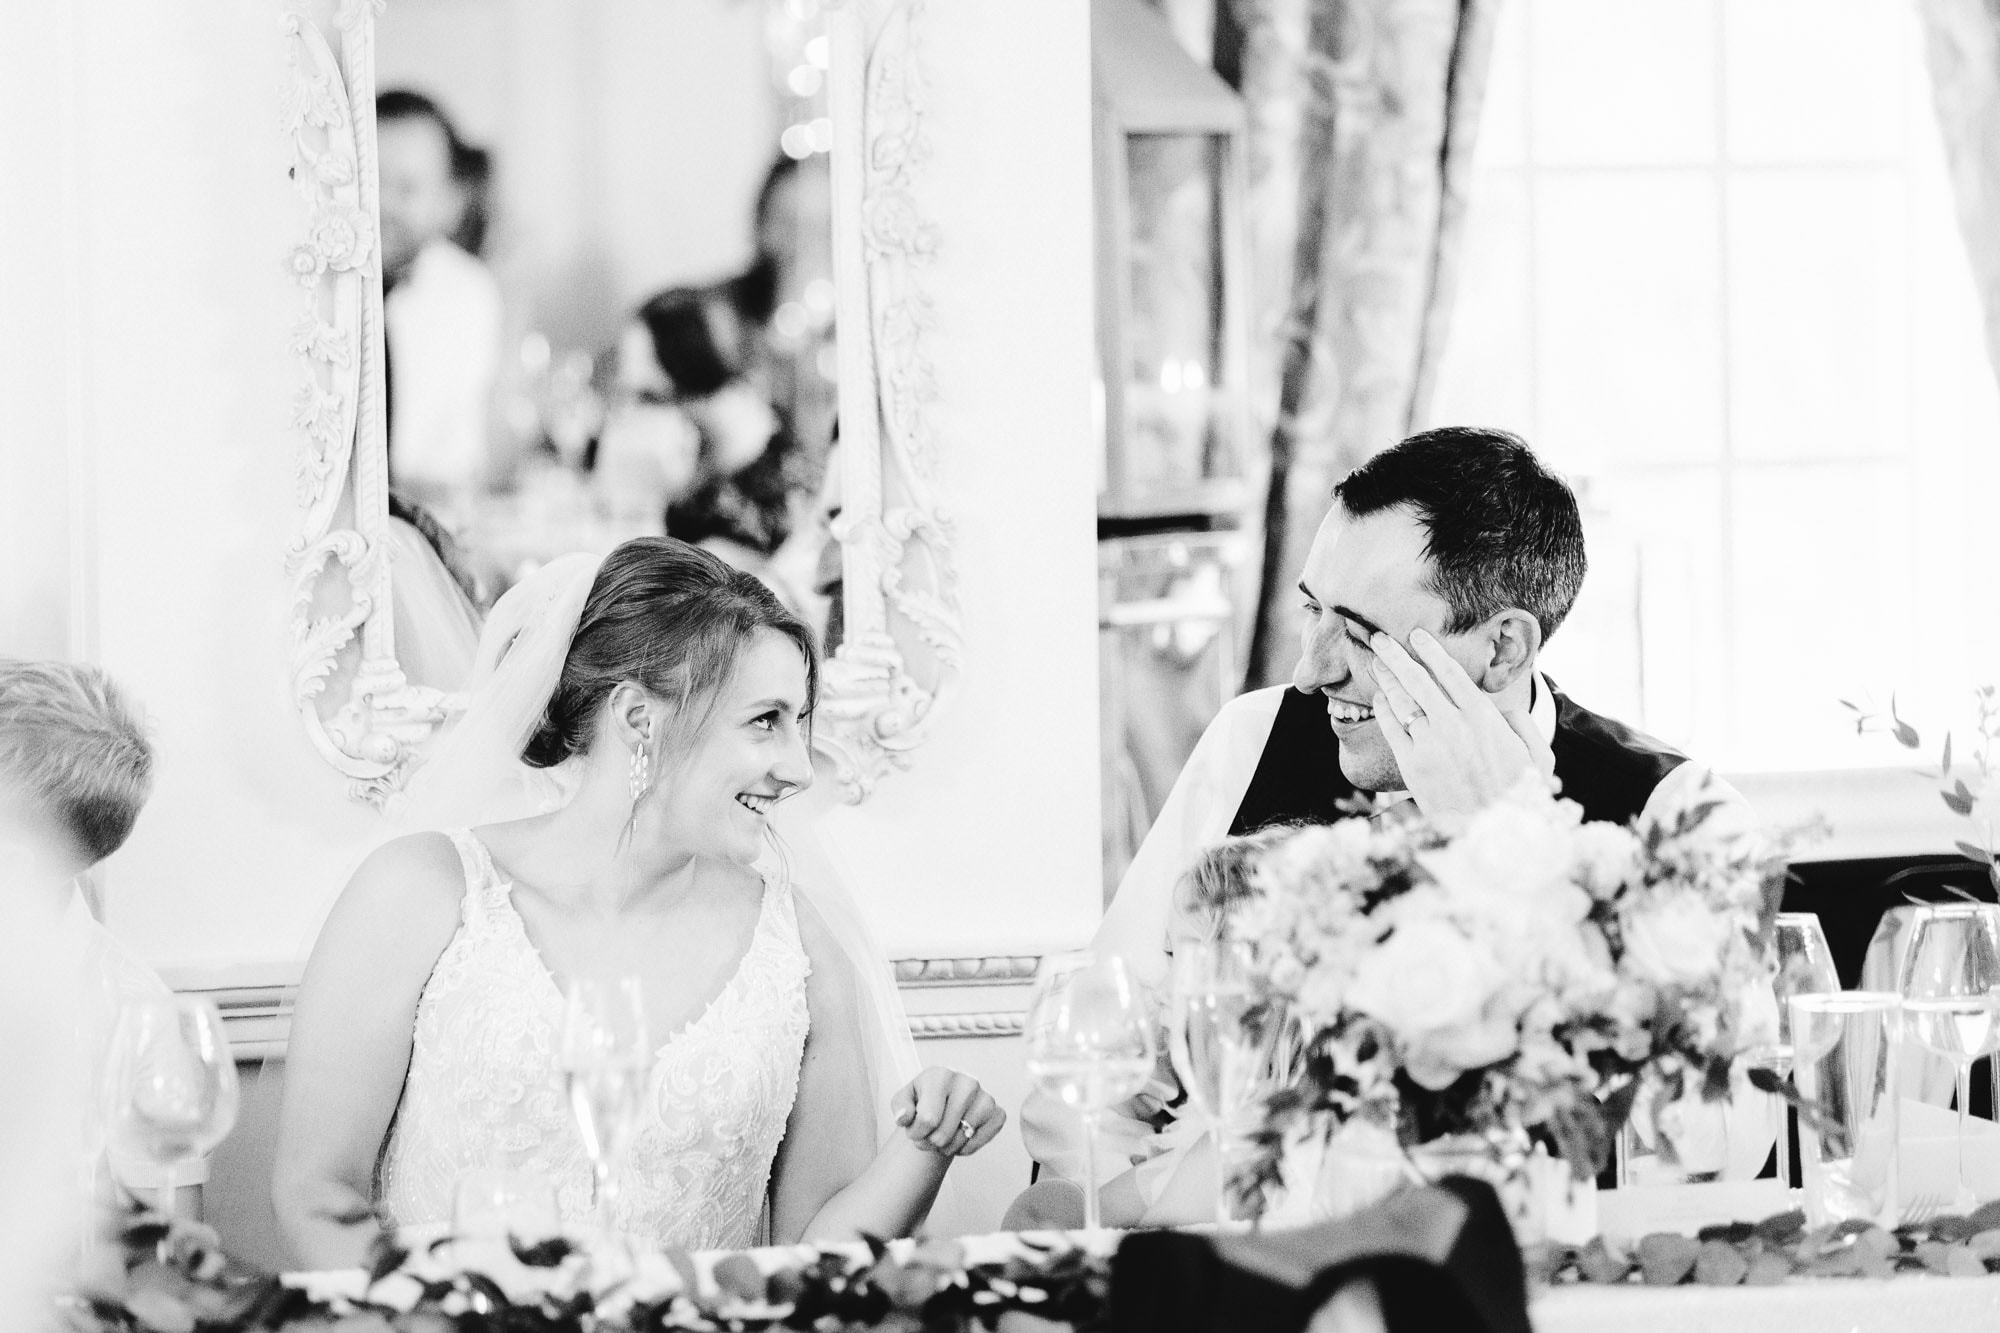 eaves hall wedding in lancashire photographs by er photography